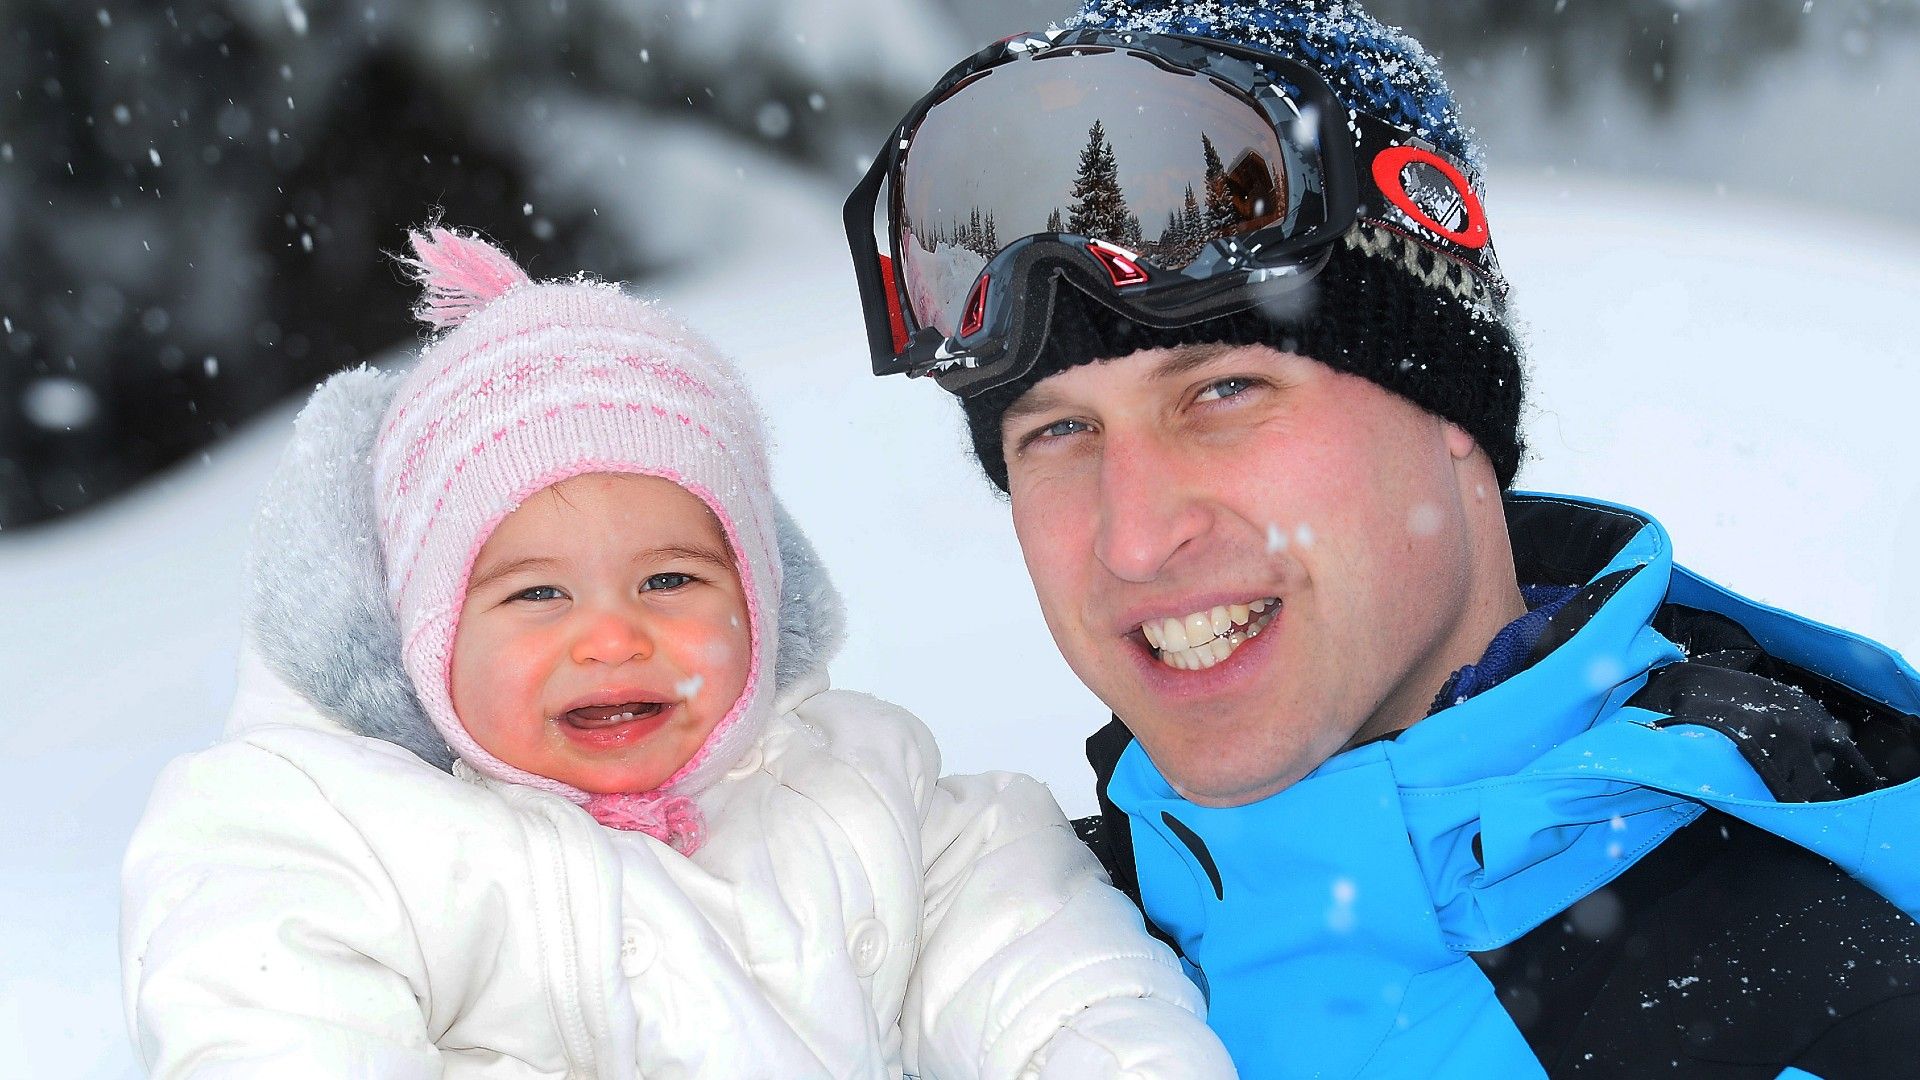 <p>                     Prince William looks every inch the proud pop as he takes an adorable photo with his young daughter, Princess Charlotte, in 2016.                   </p>                                      <p>                     The little Princess is bundled up to fend off the cold of the French Alps, layered up with a big puffy coat and hat, but you can still see her beaming face.                   </p>